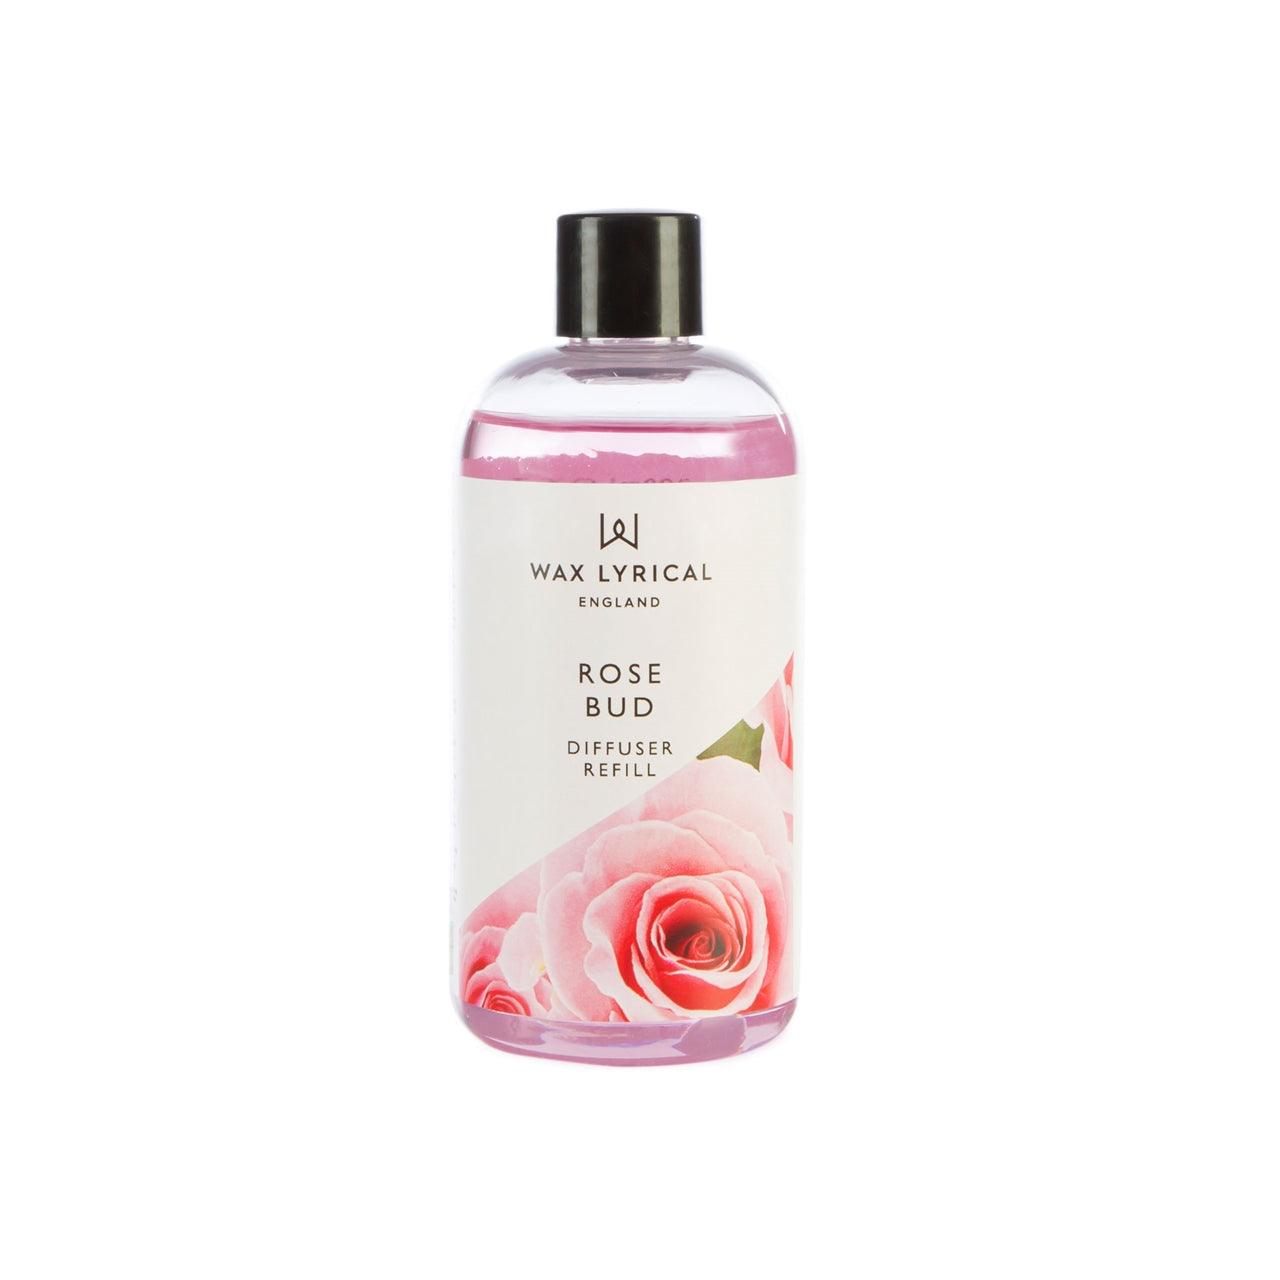 Rose bud - Diffuser refill 200ml - RUTHERFORD & Co